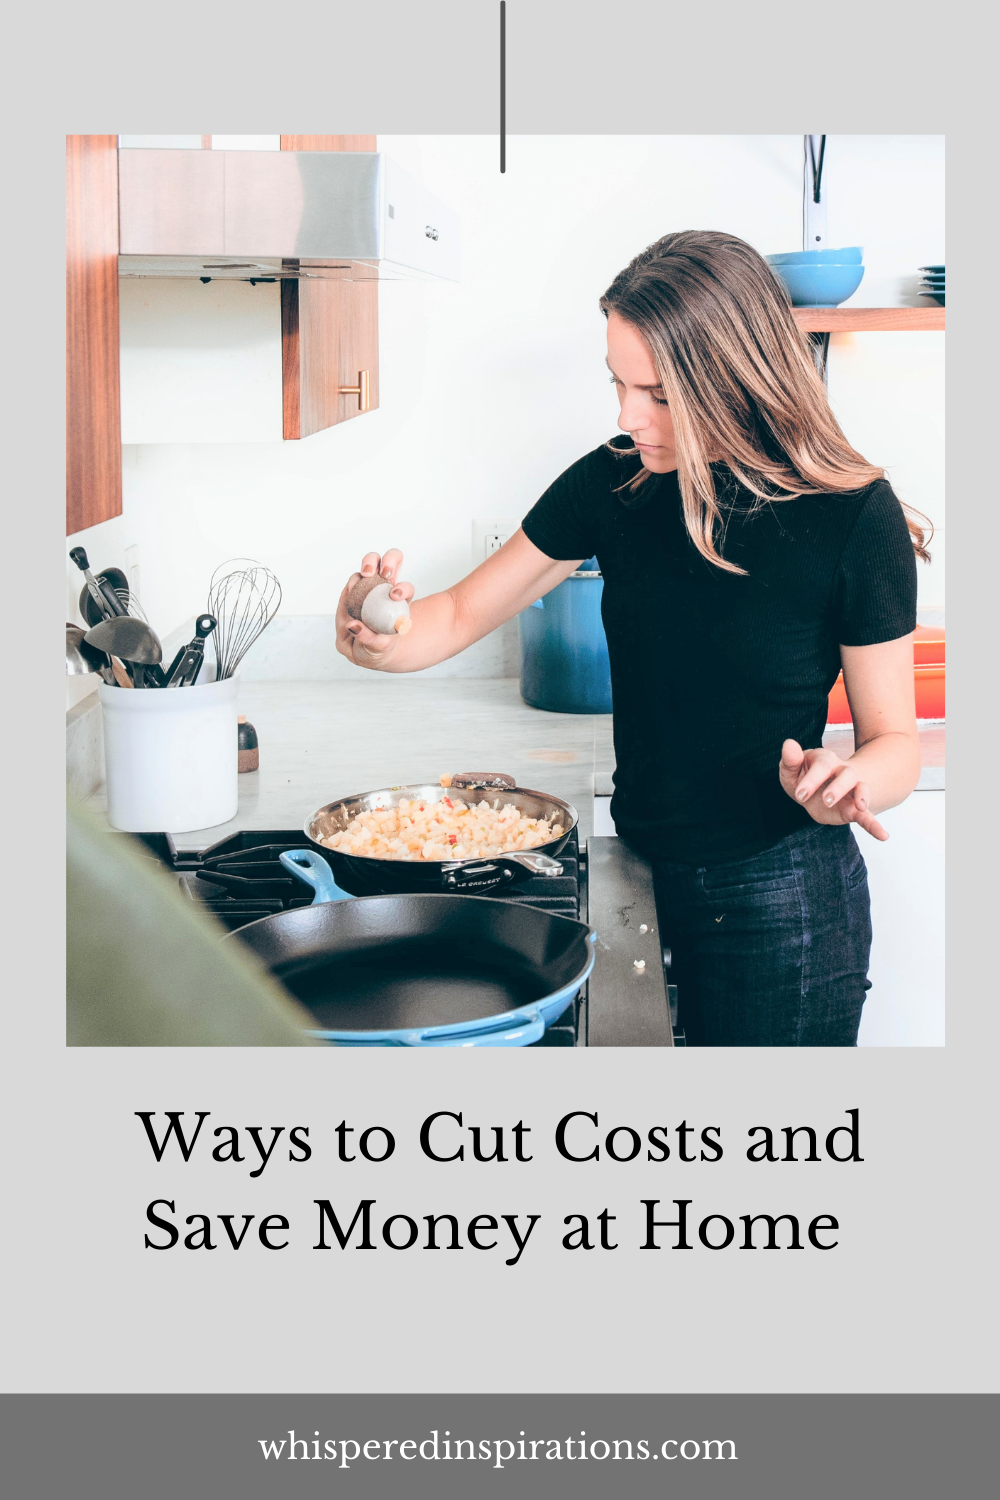 Woman seasons her food while she cooks at home. This article covers brilliant ways to cut costs and save money at home.